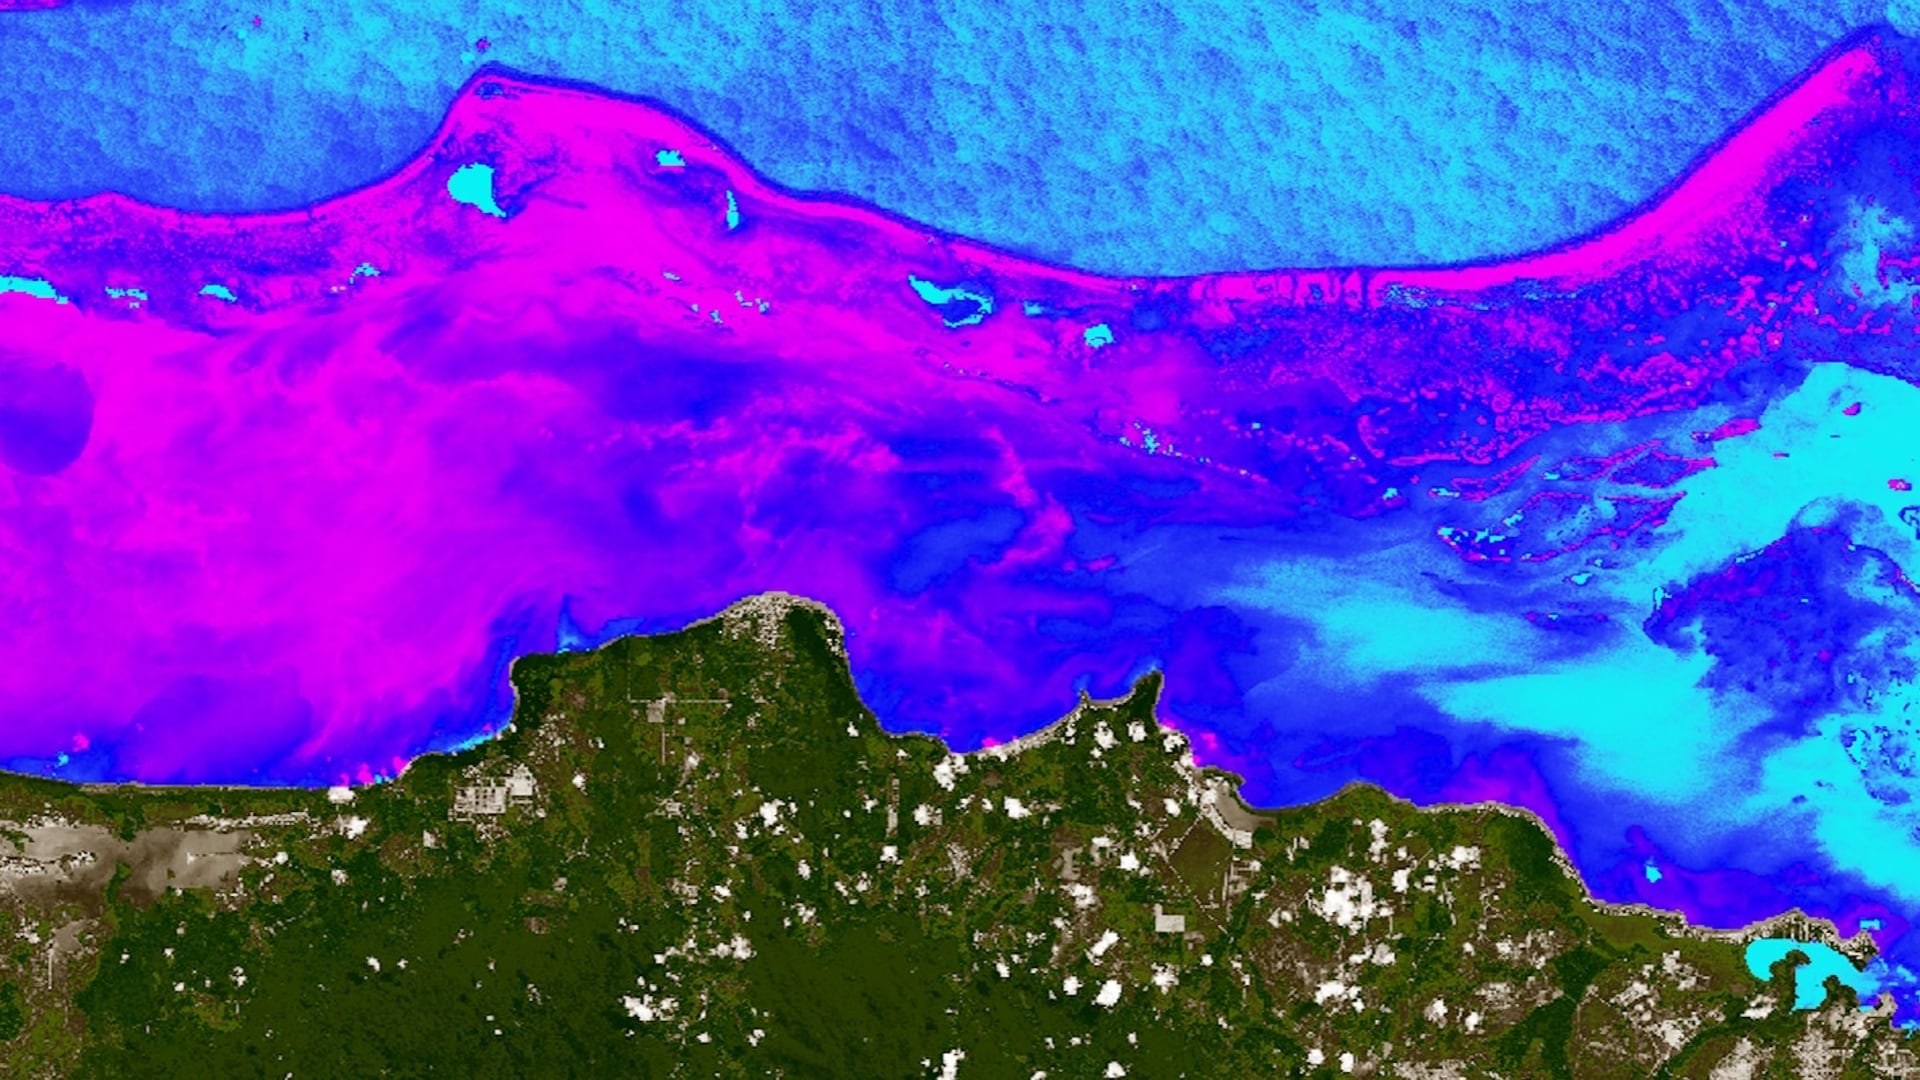 Turbidity derived from a January 28, 2019, Landsat 8 OLI image. The coastal region of Belize, including the Belize Barrier Reef, is displayed. Pink areas highlight high levels of turbidity. Very turbid waters may have consequences on the health of coral reefs, which require clear water in order to photosynthesize efficiently. These data may increase partners' understanding of spatiotemporal patterns of coastal water quality and will improve their capacity for allocating resources for coral reef monitoring and restoration.